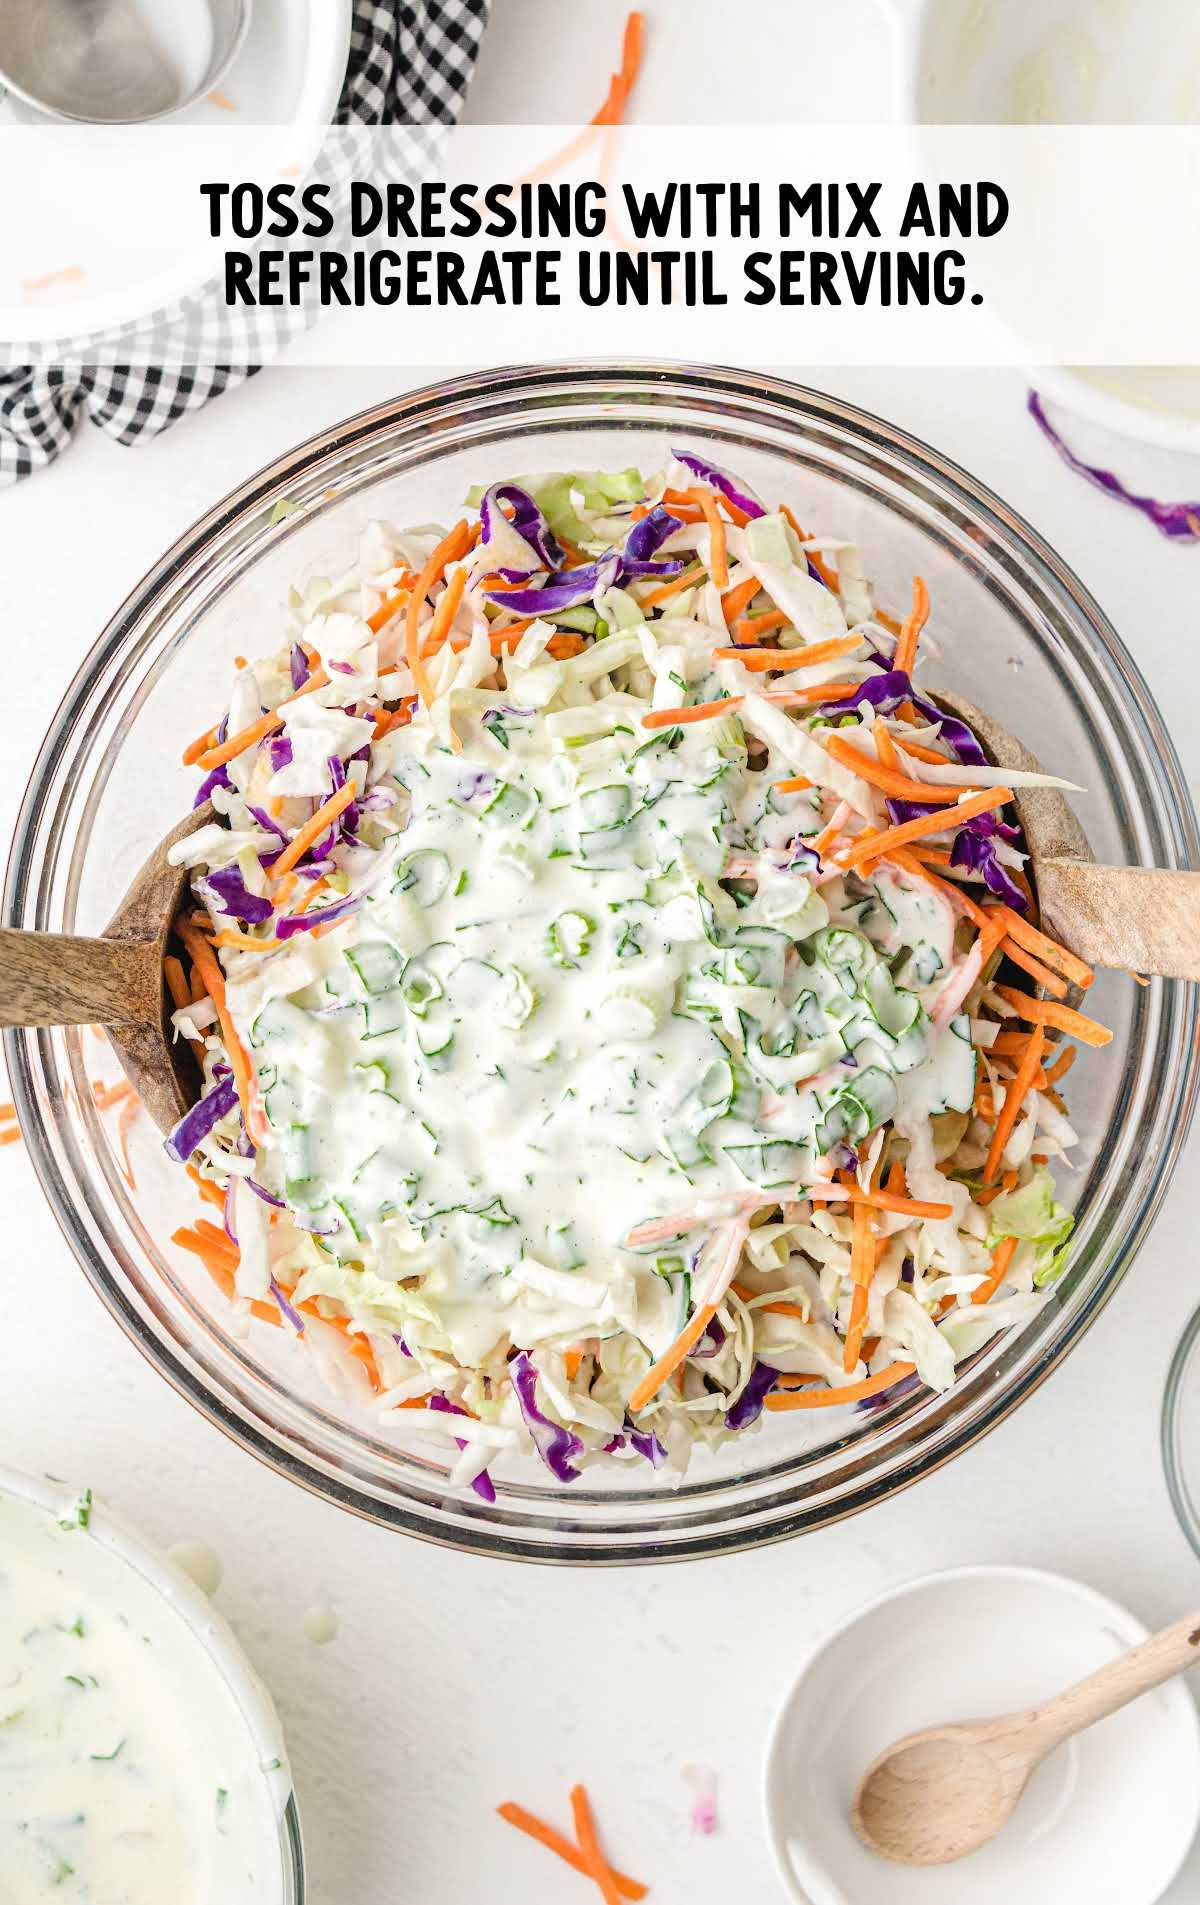 salad dressing being poured and tossed into the coleslaw mixture